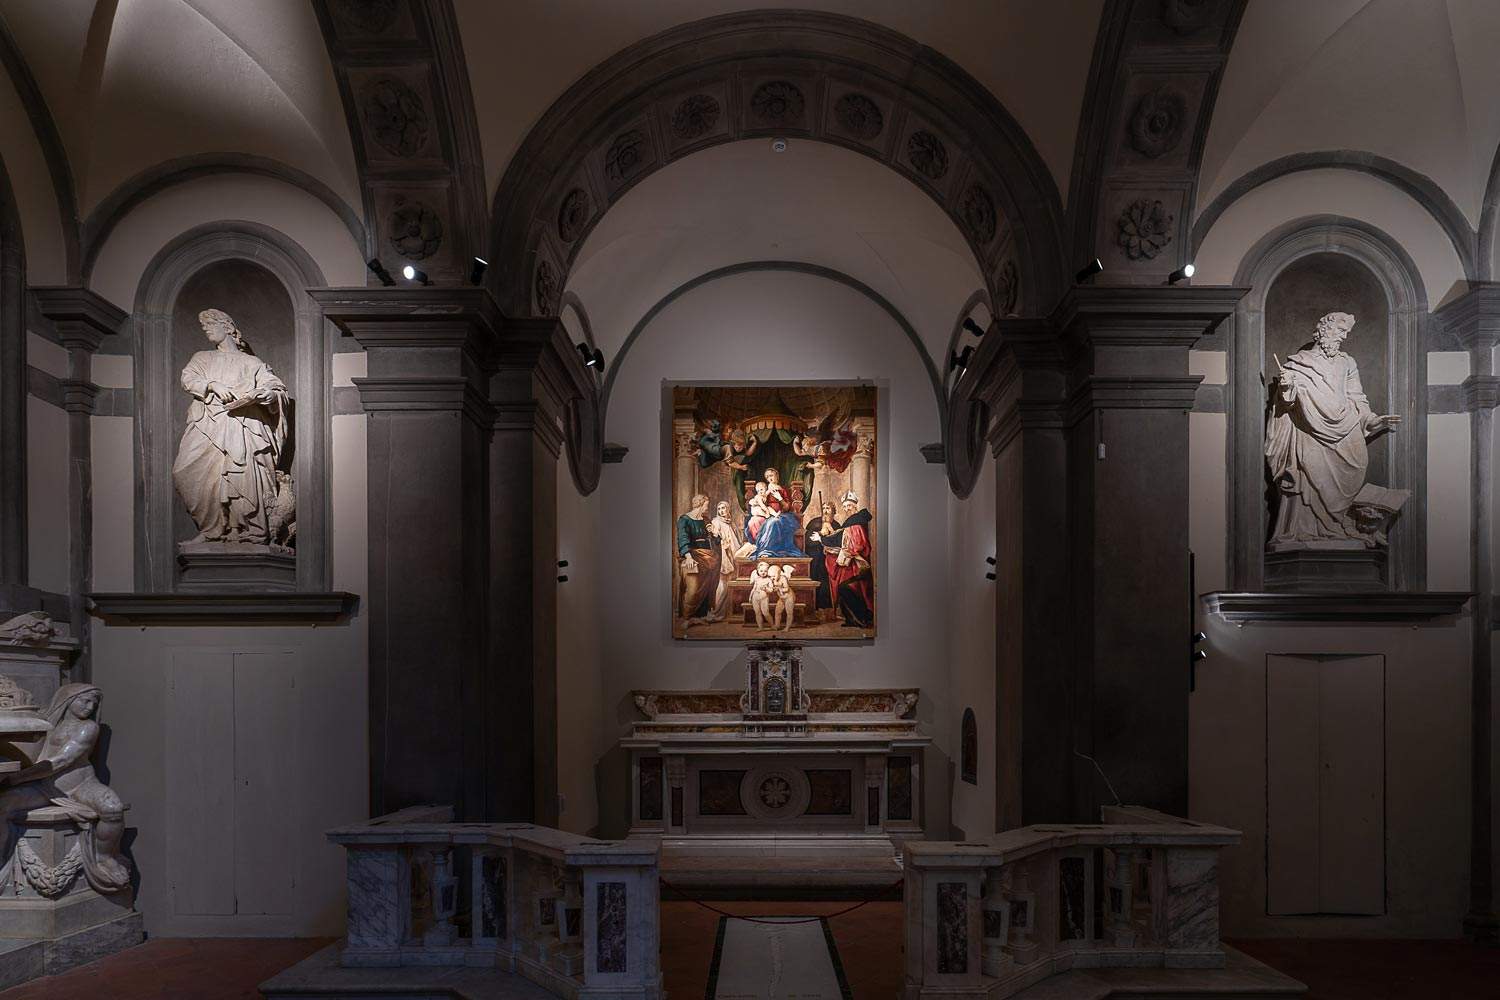 Raphael's Madonna of the Canopy returns to Pescia, to the church where it was for 150 years